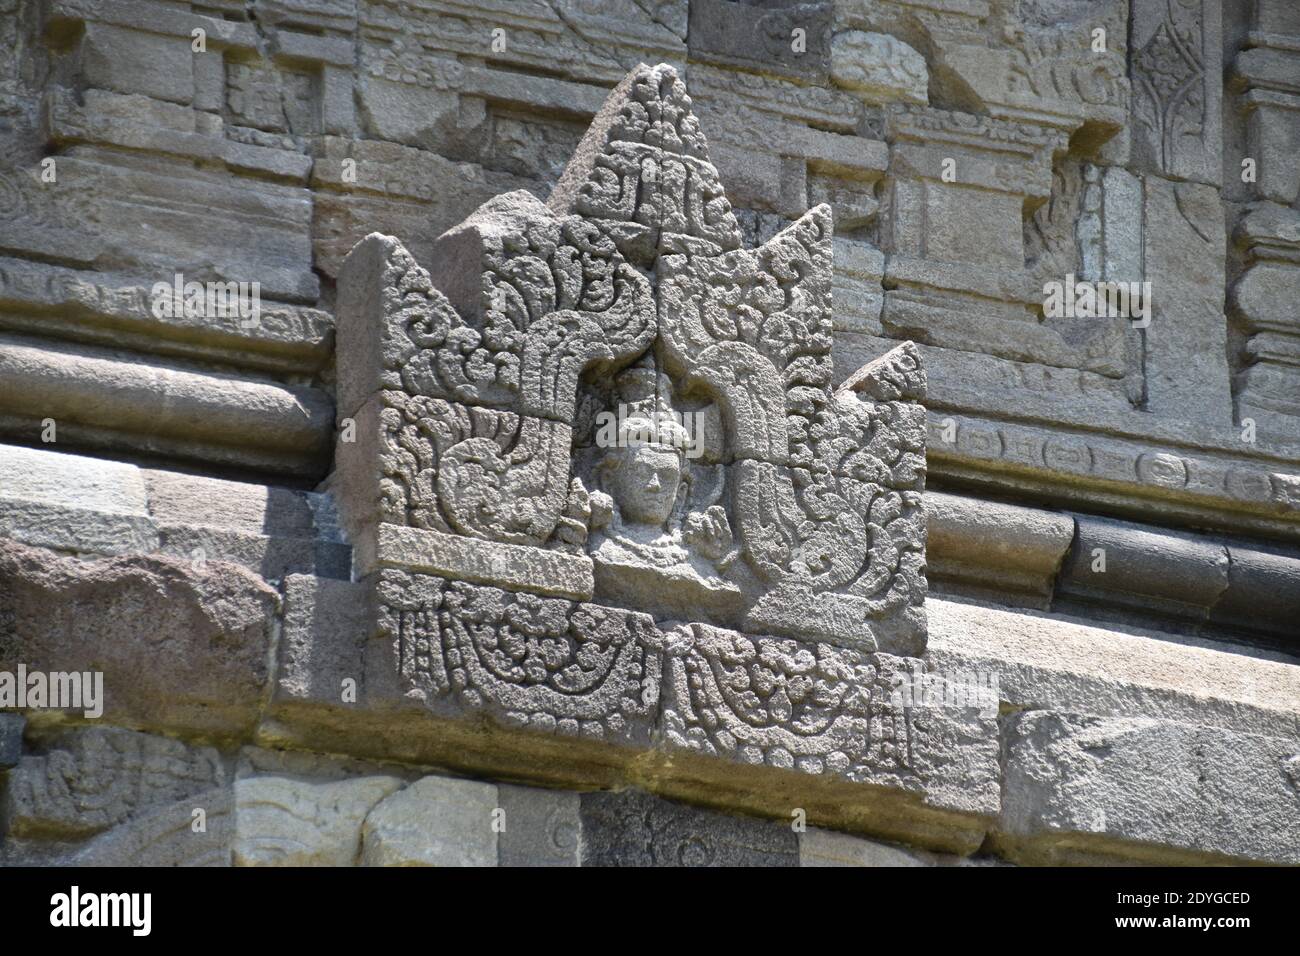 Bodhisattva relief at main temple's wall in the Plaosan temple complex at Central Java, Indonesia Stock Photo